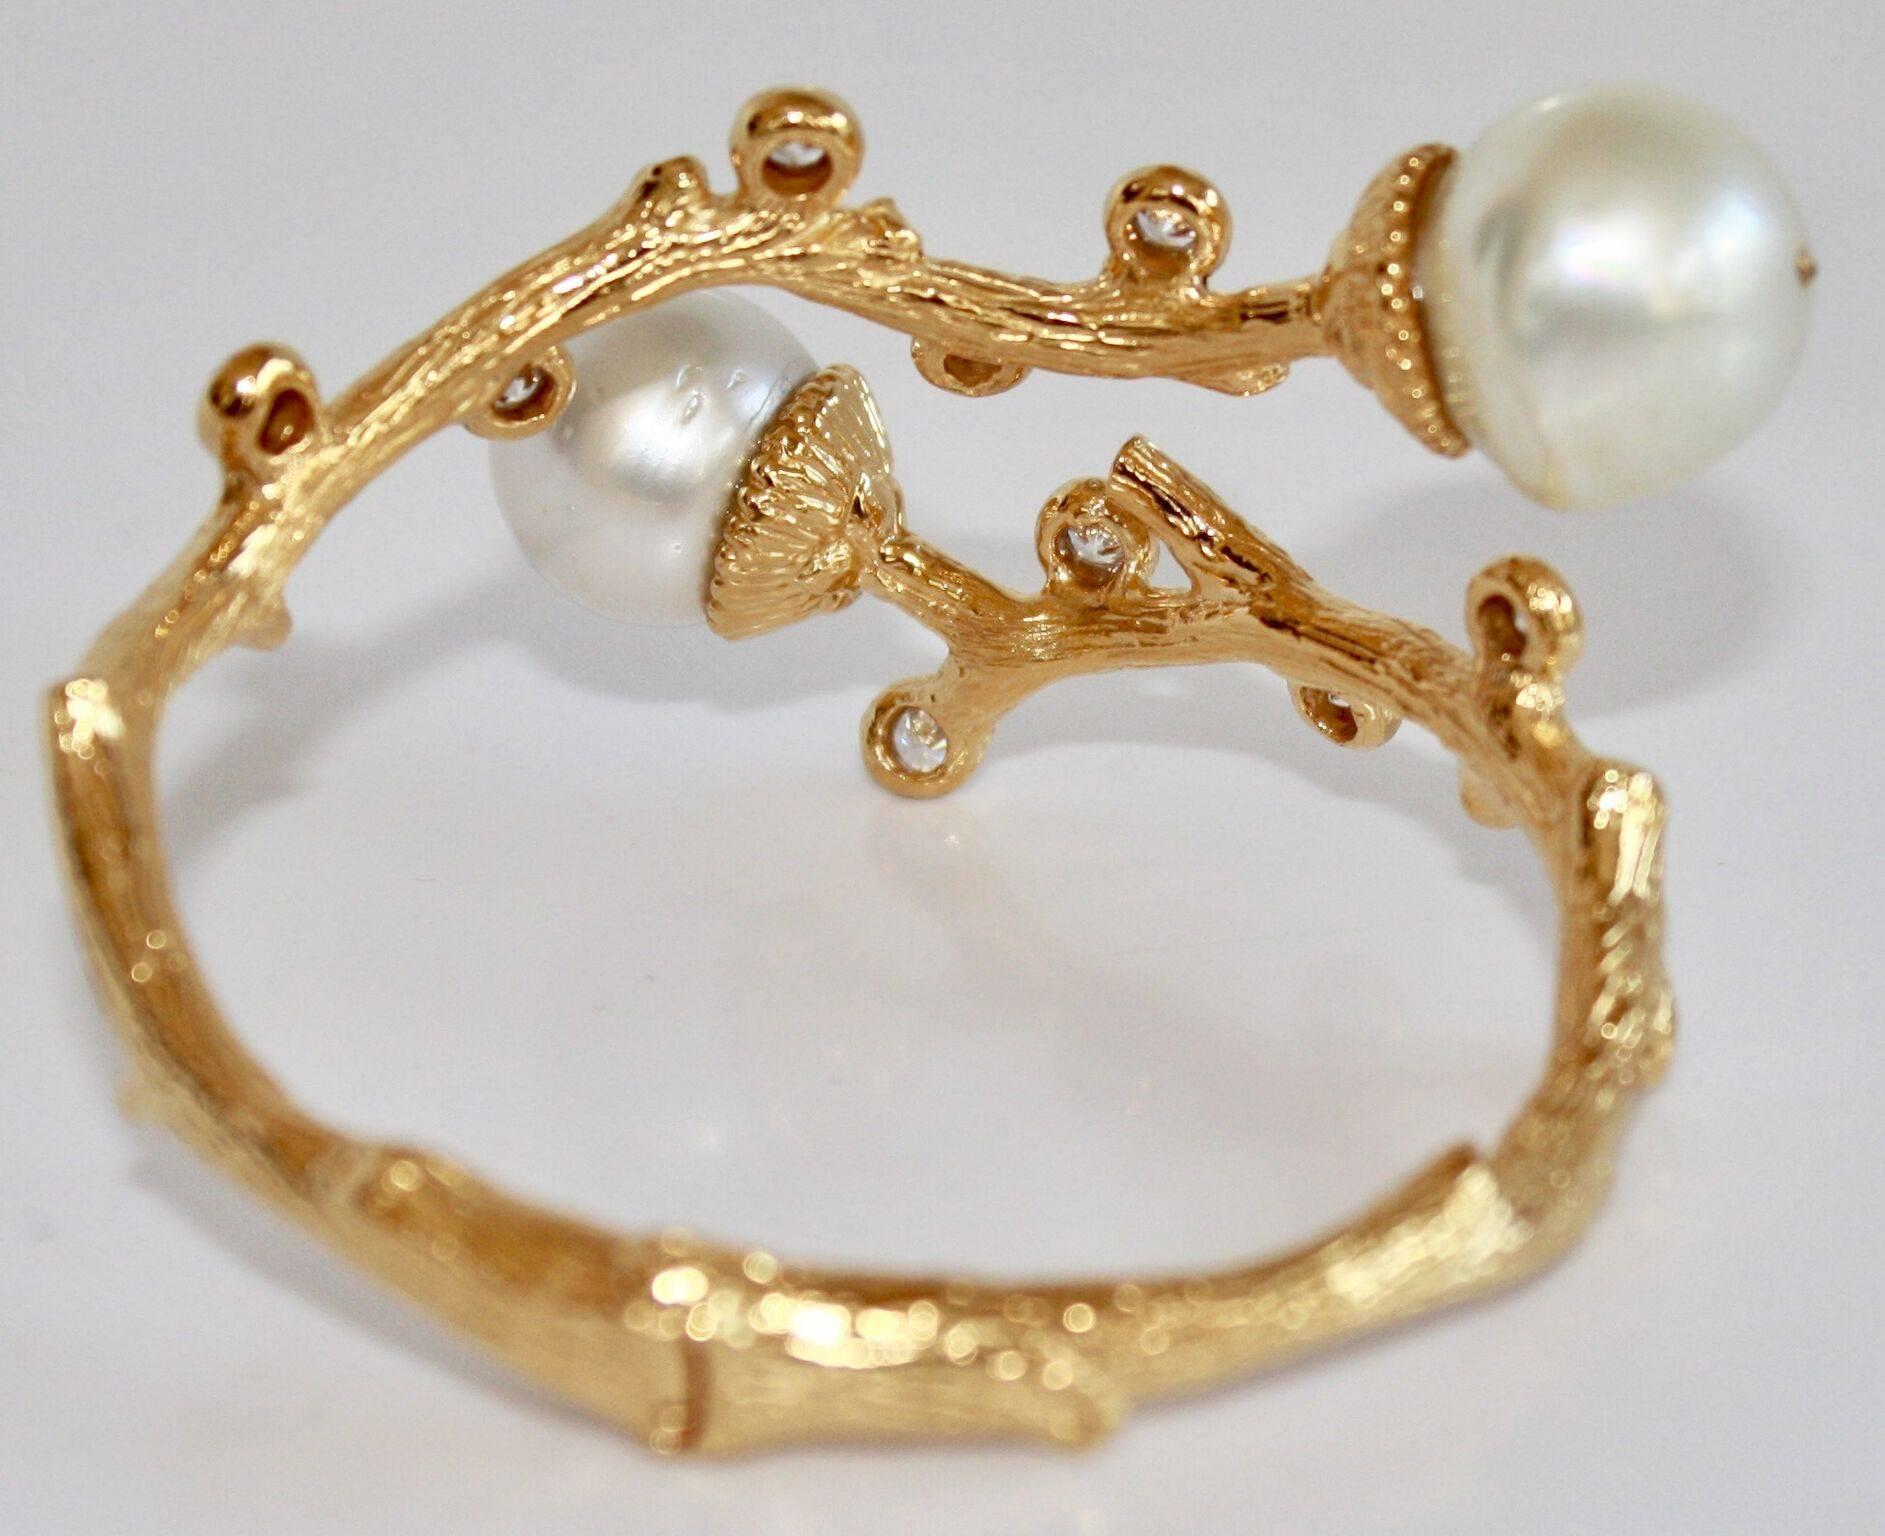 Gold plated bronze bracelet with cubic zirconia and south sea pearls. Bracelet has a discreet hinge at the back, making it easy to open and close. 

6